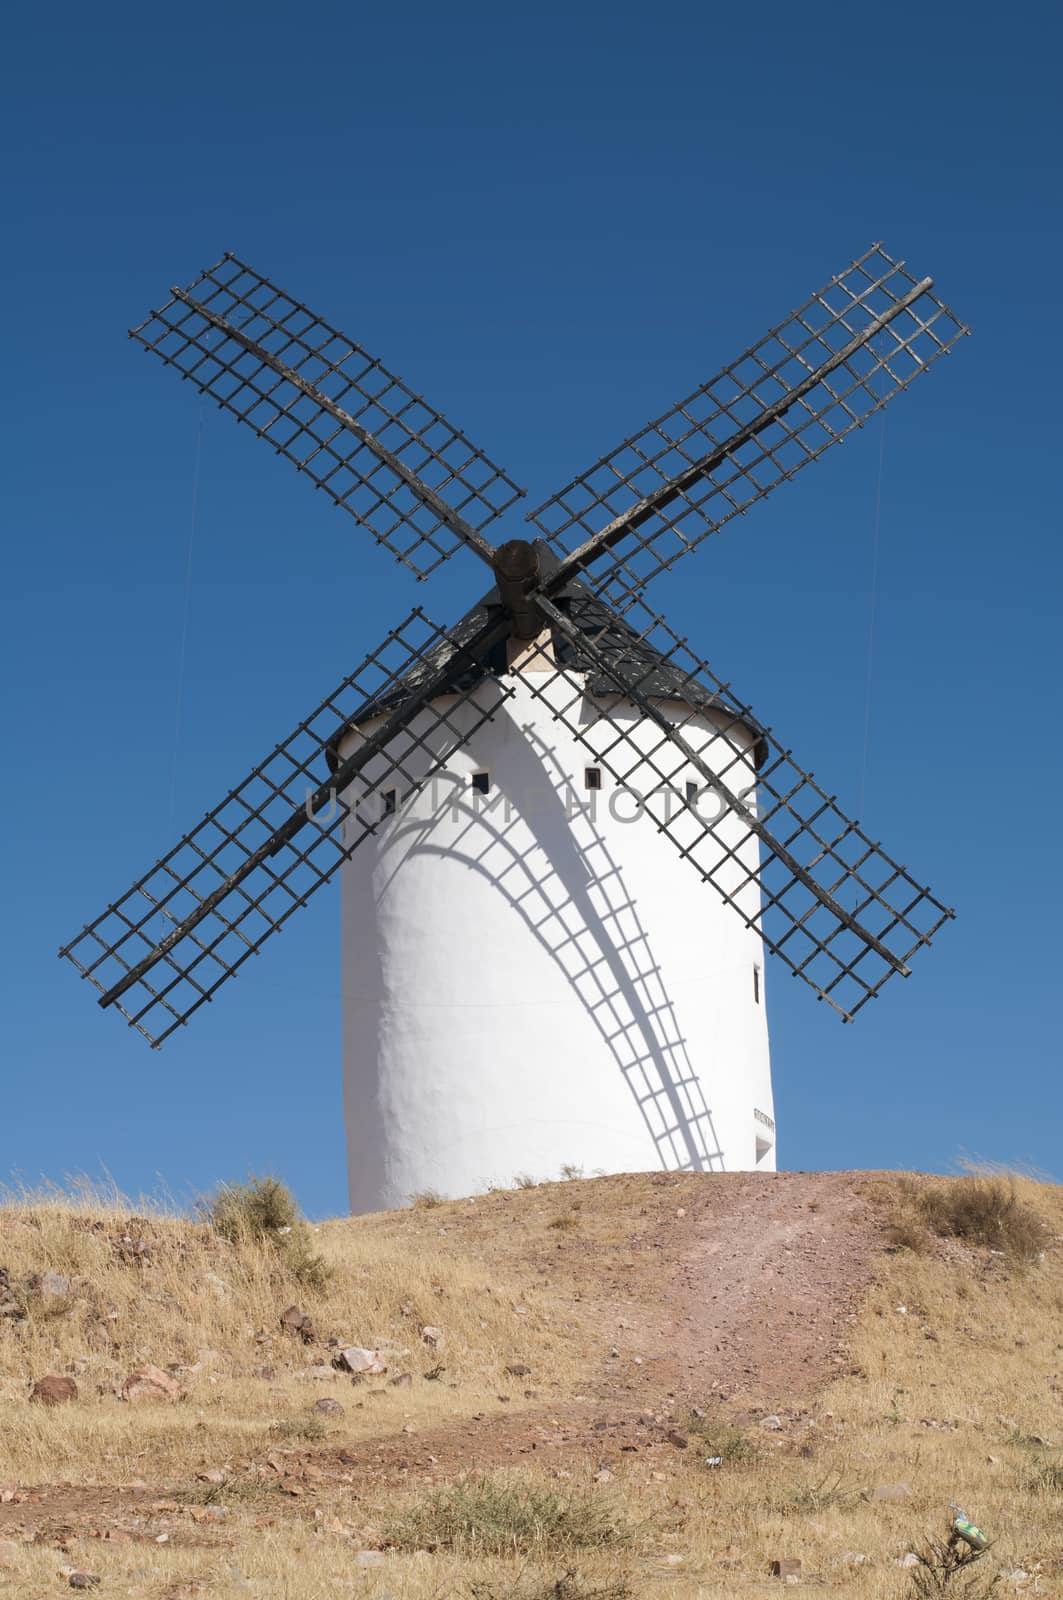 White ancient windmill. Blue sky background